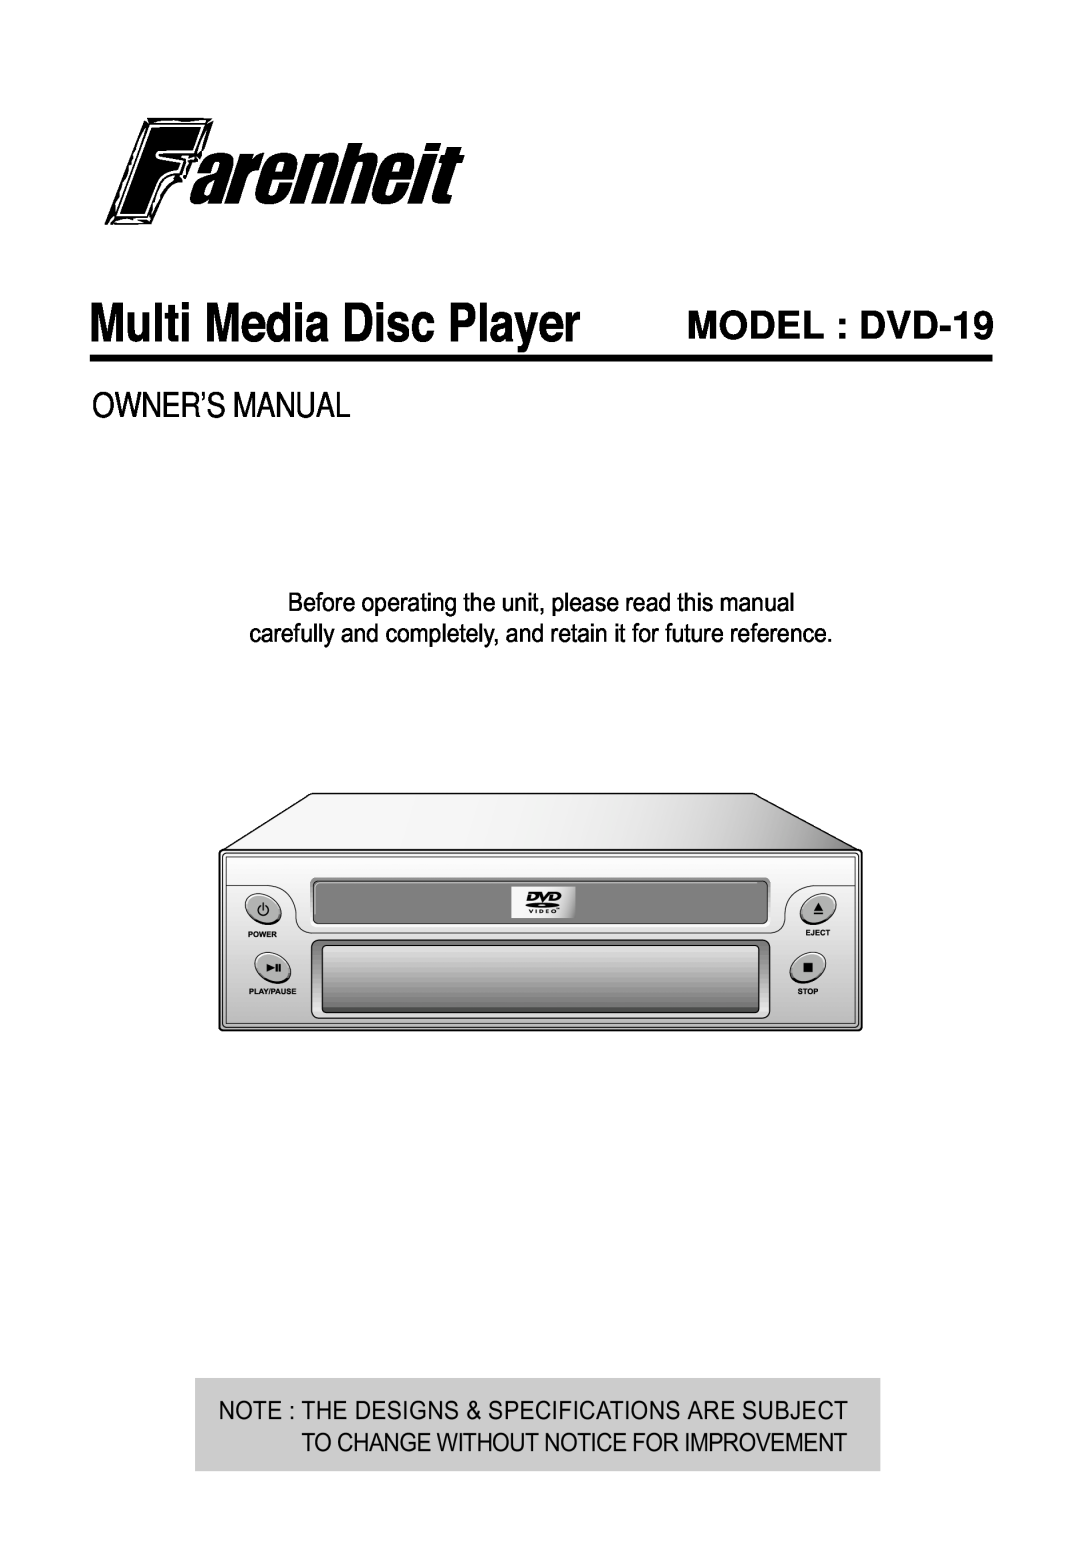 Farenheit Technologies owner manual MODEL DVD-19, Note The Designs & Specifications Are Subject 